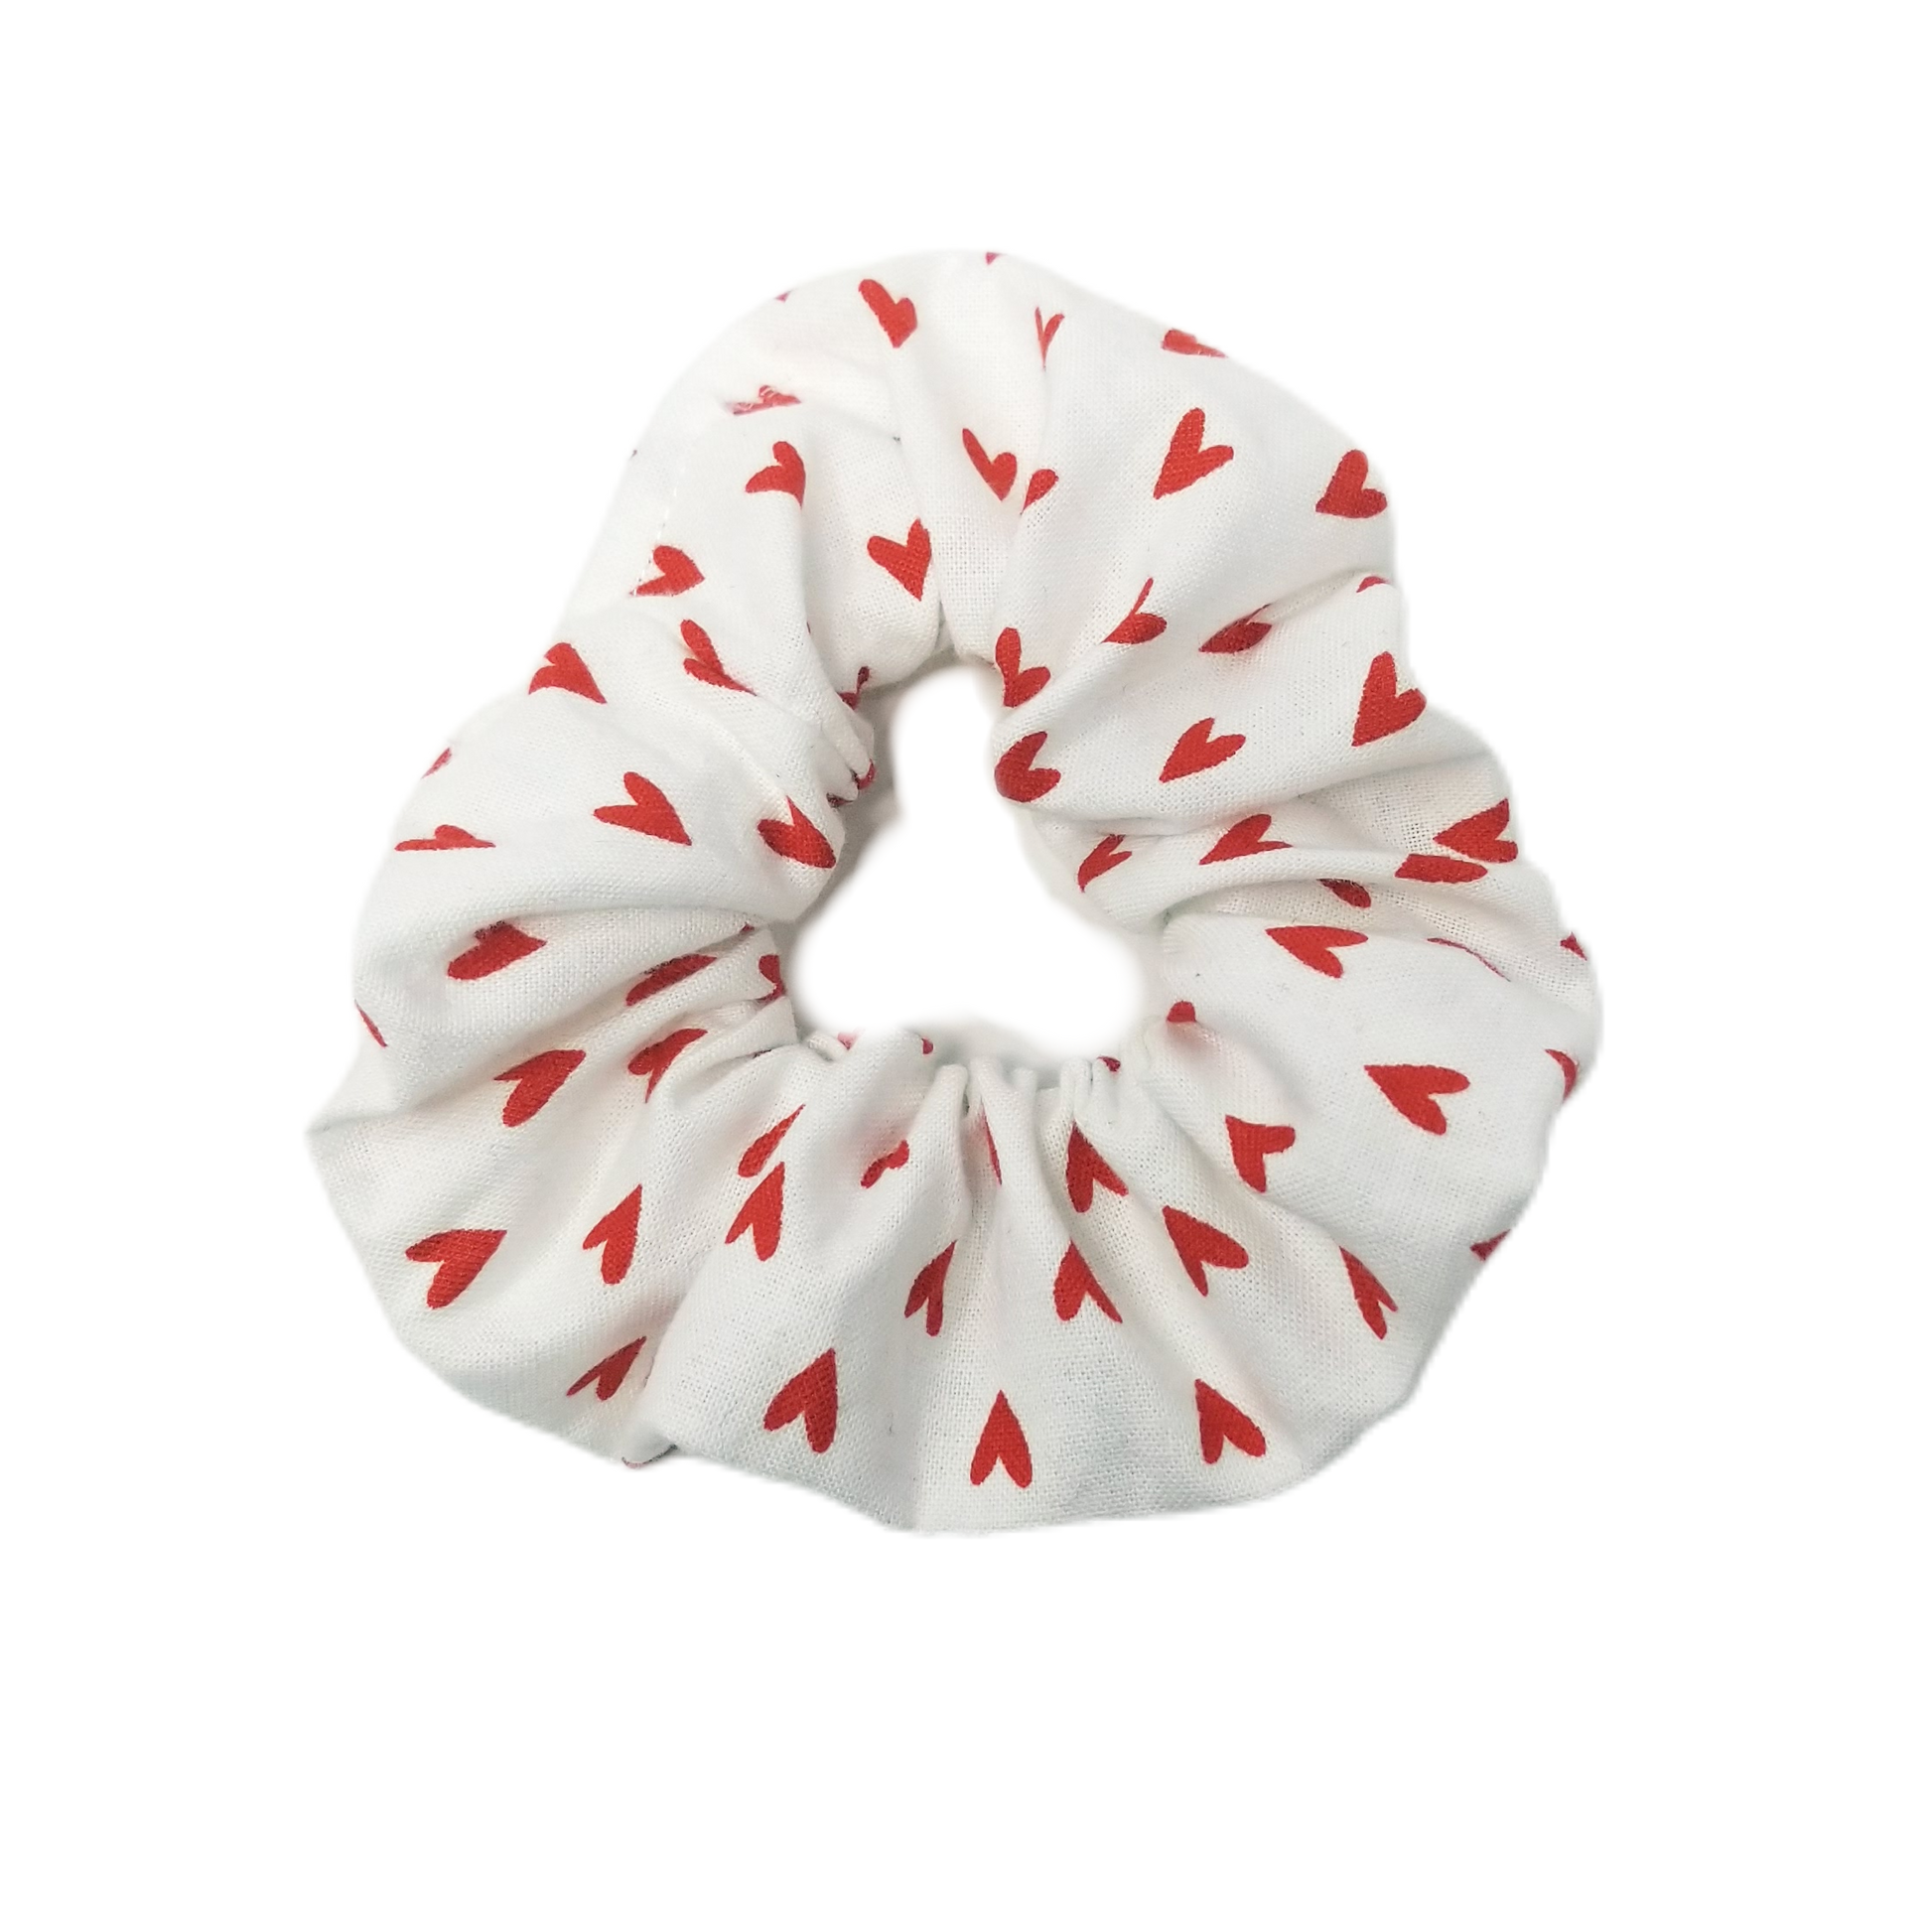 Large Red Hearts on White Valentine's Scrunchie